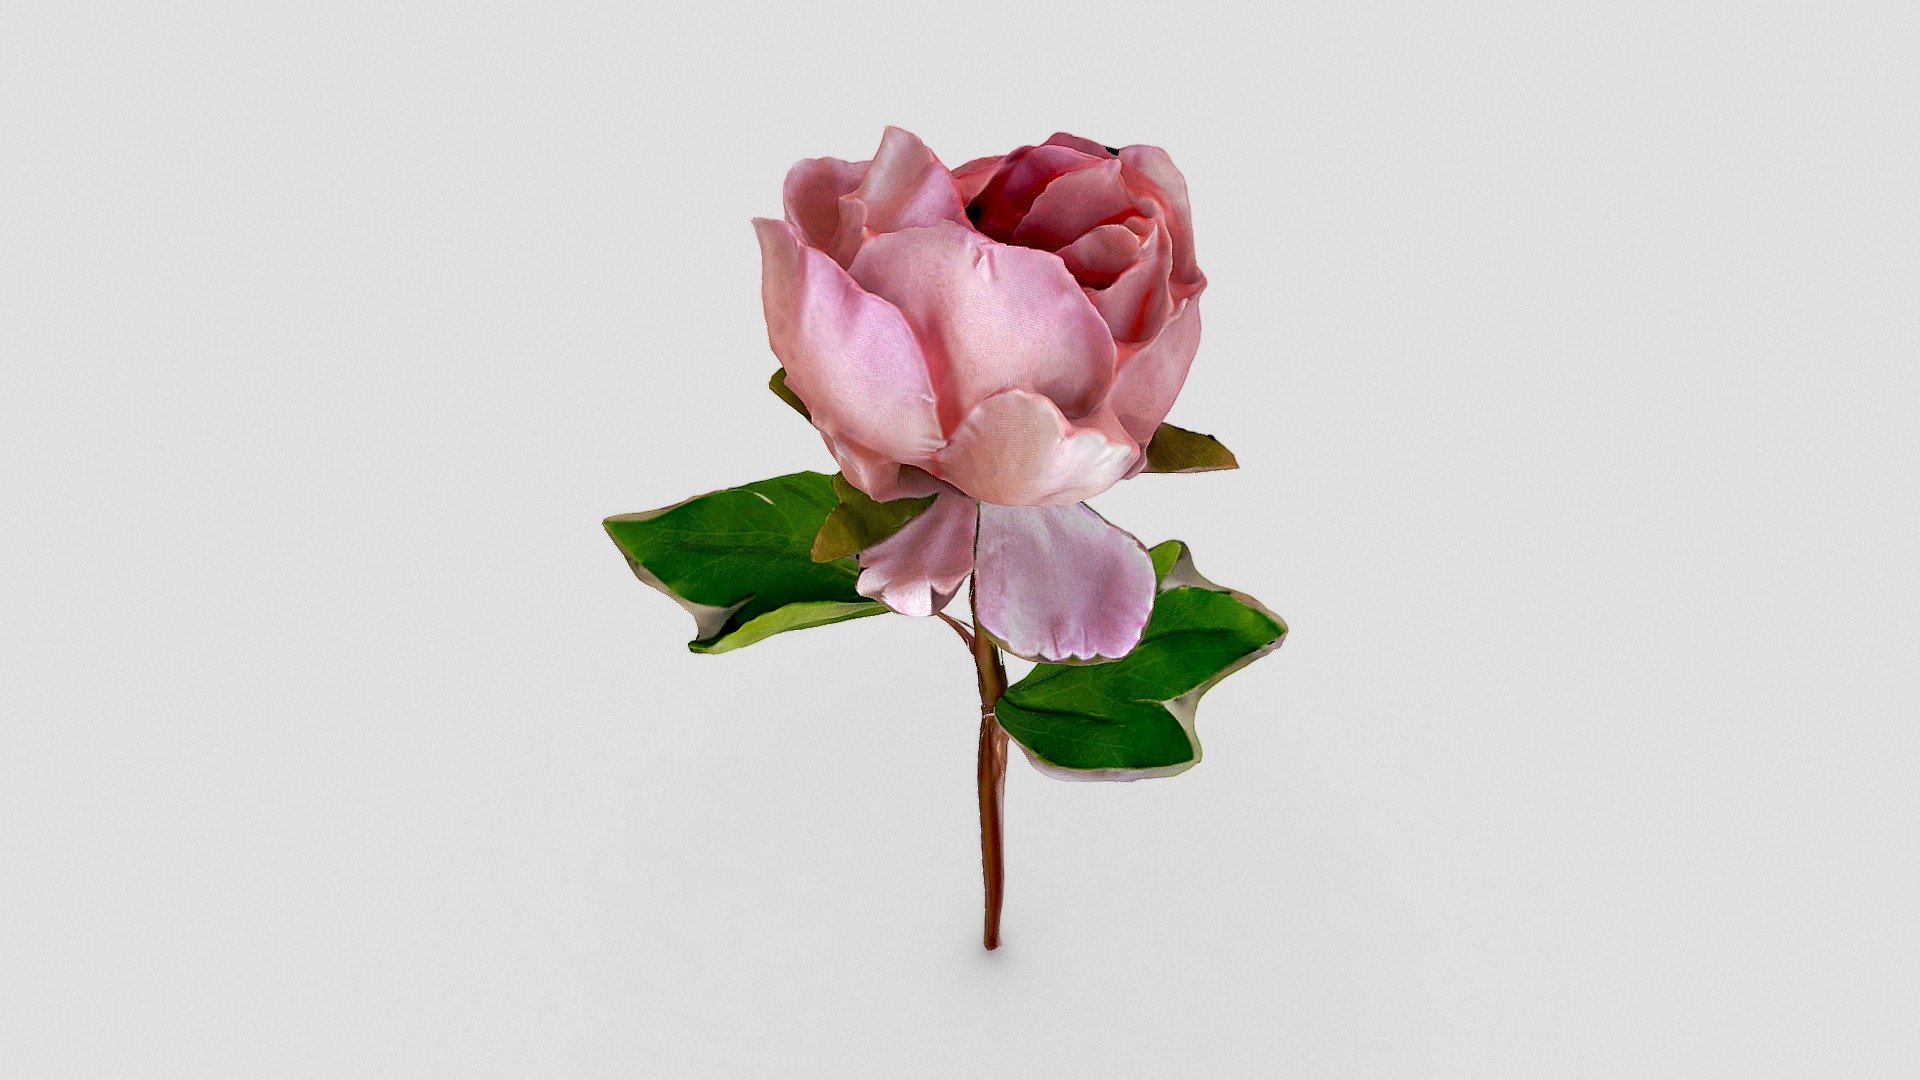 Captured with @PolycamAI

1scanaday - 235: Flower - Download Free 3D model by alexdelker 3d model